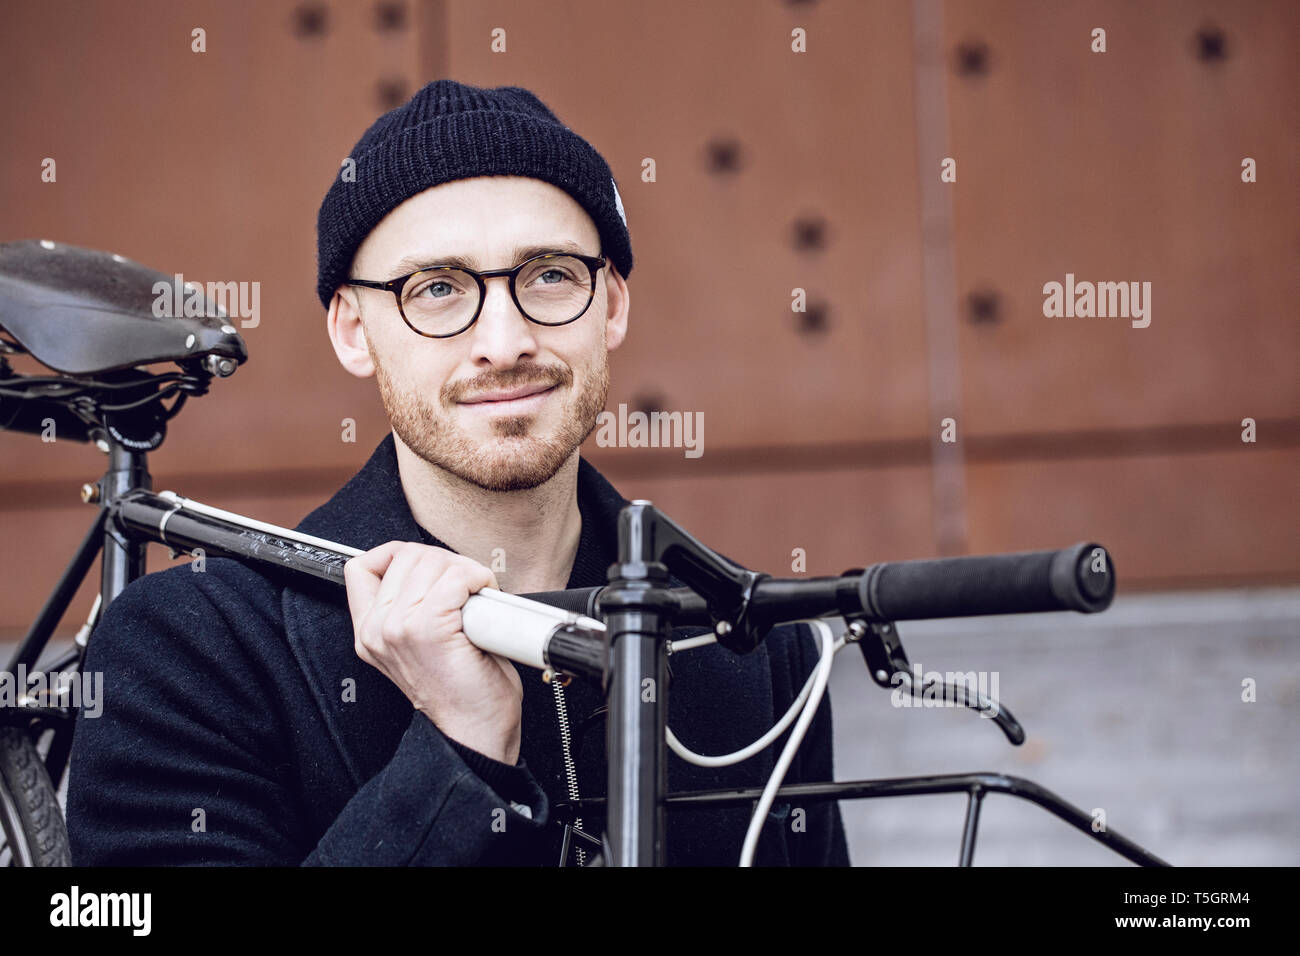 Man with beanie hat carrying his bicycle Stock Photo